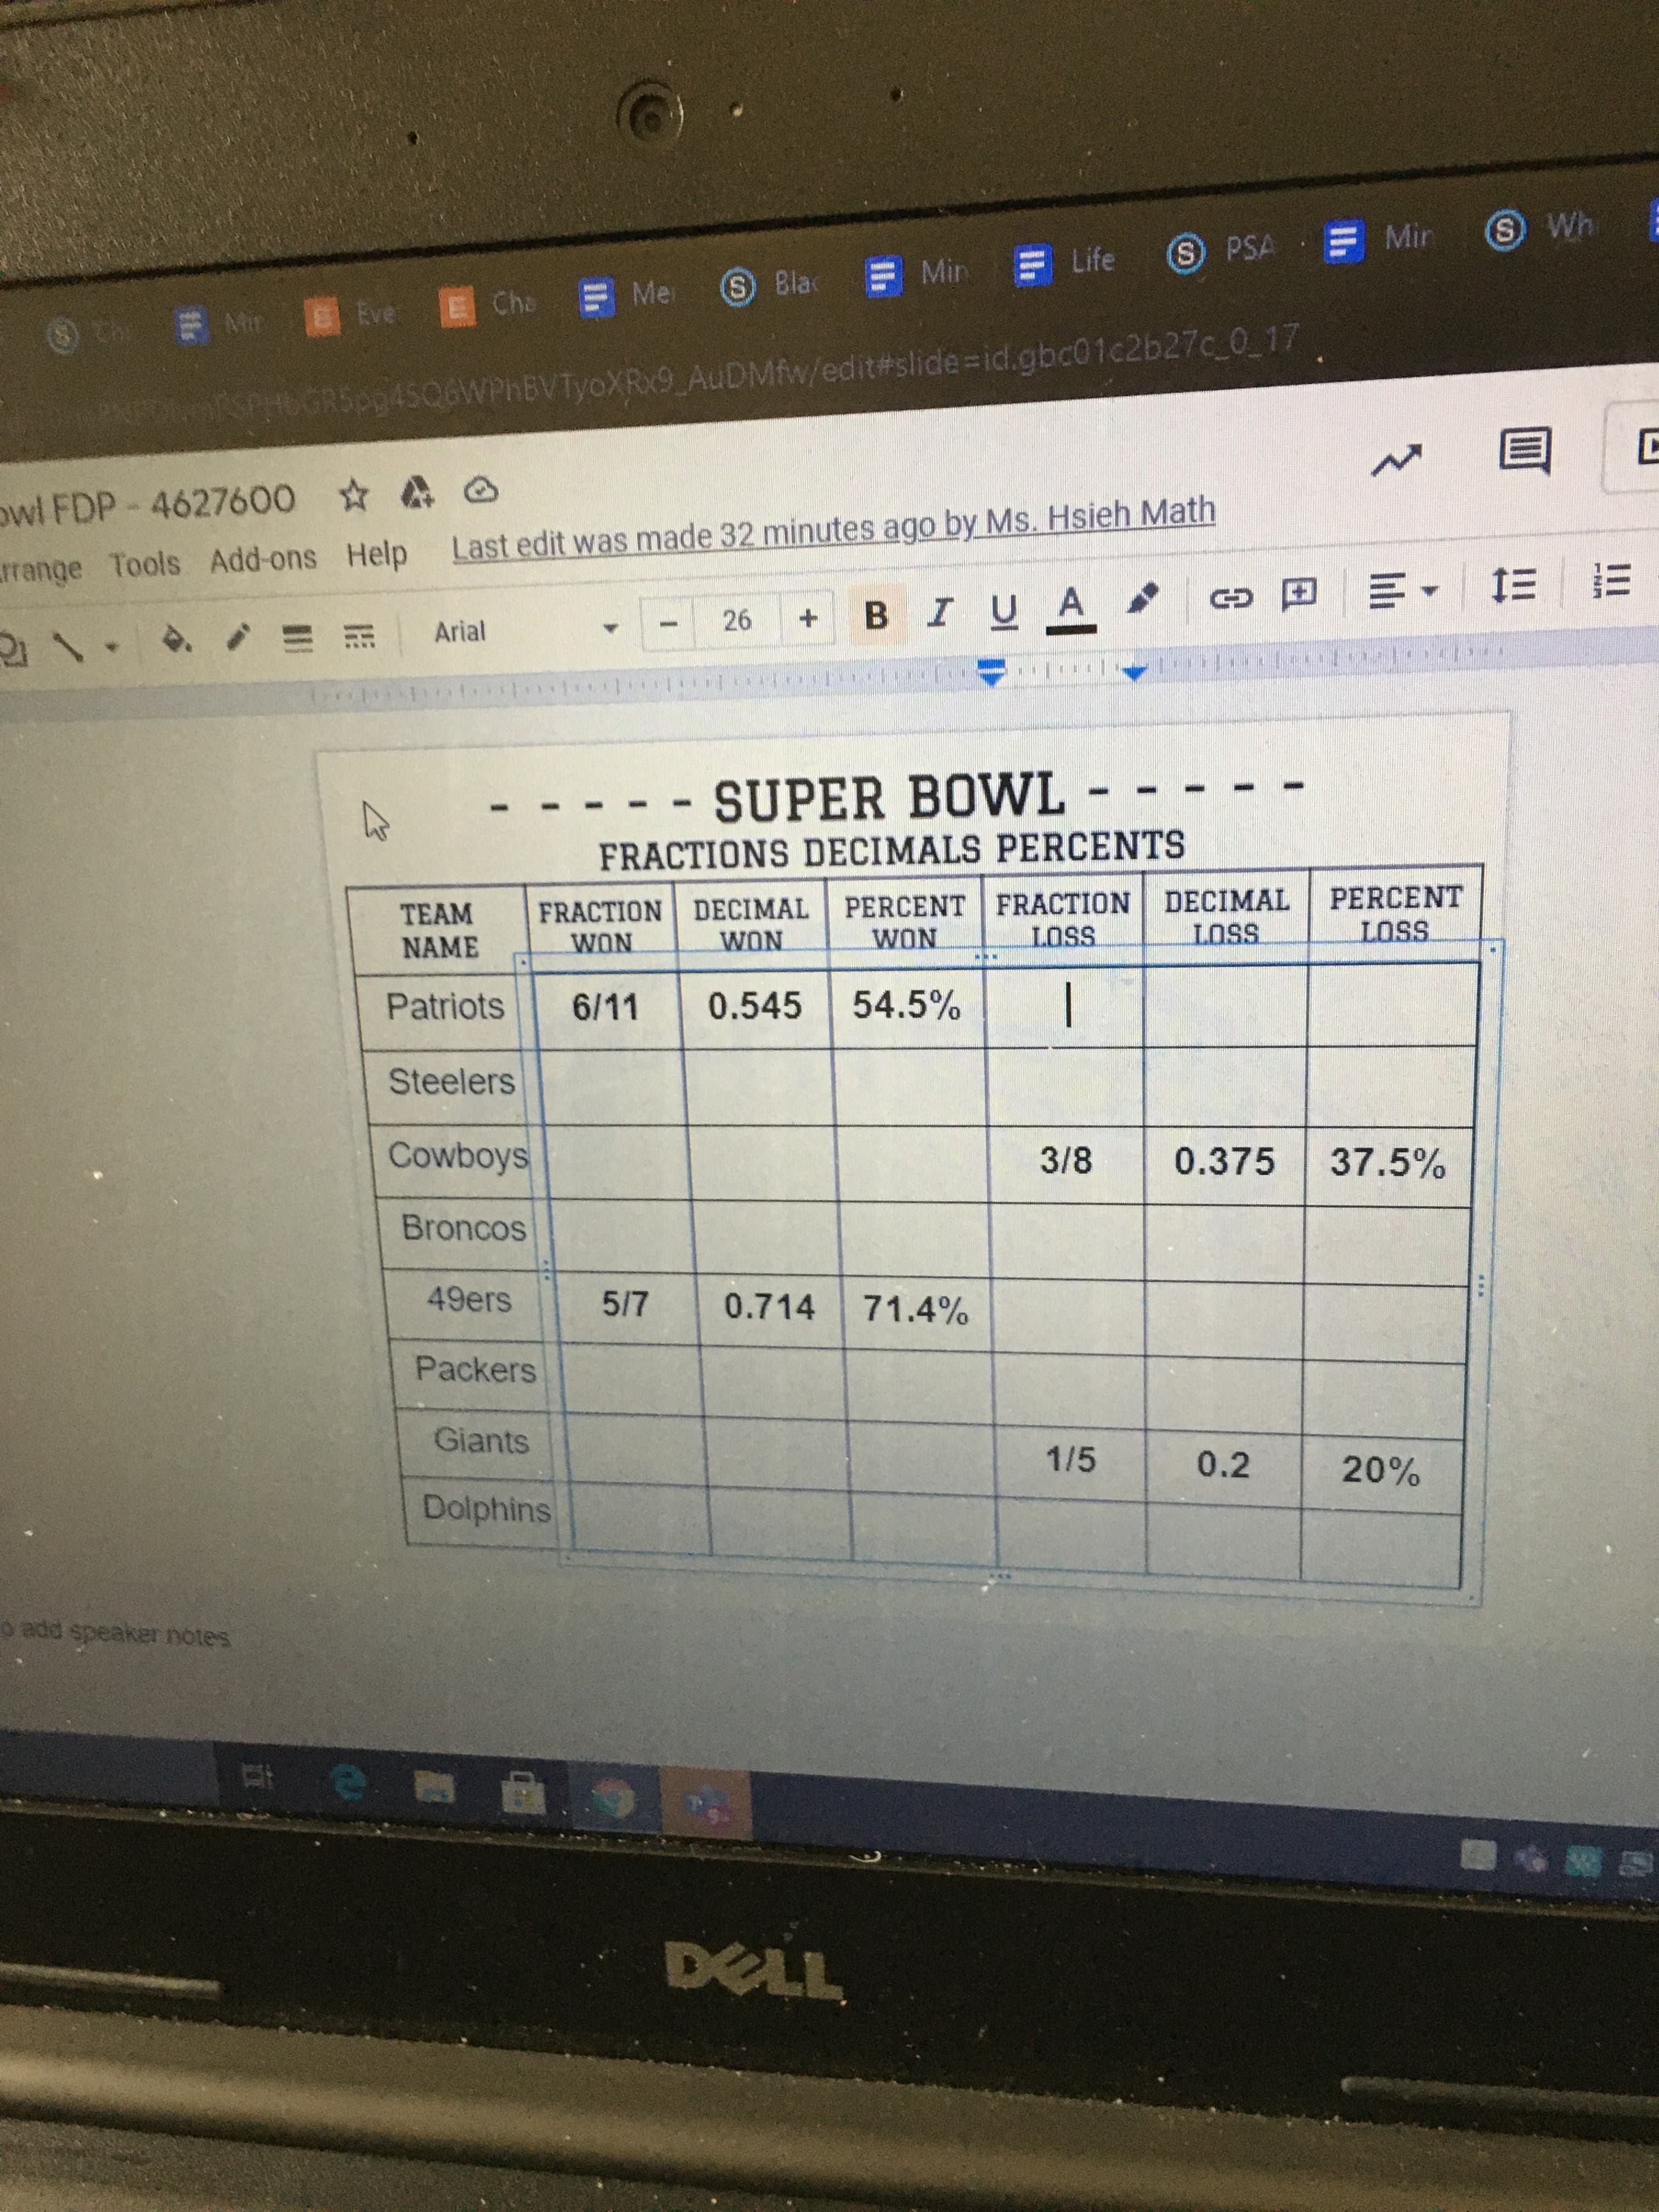 SUPER BOWL
FRACTIONS DECIMALS PERCENTS
TEAM
NAME
FRACTION DECIMAL PERCENT FRACTION DECIMAL
WON
PERCENT
LOSS
WON
WON
LOSS
LOSS
Patriots
6/11
0.545
54.5%
|
Steelers
Cowboys
3/8
0.375
37.5%
Broncos
49ers
5/7
0.714
71.4%
Packers
Giants
1/5
0.2
20%
Dolphins
